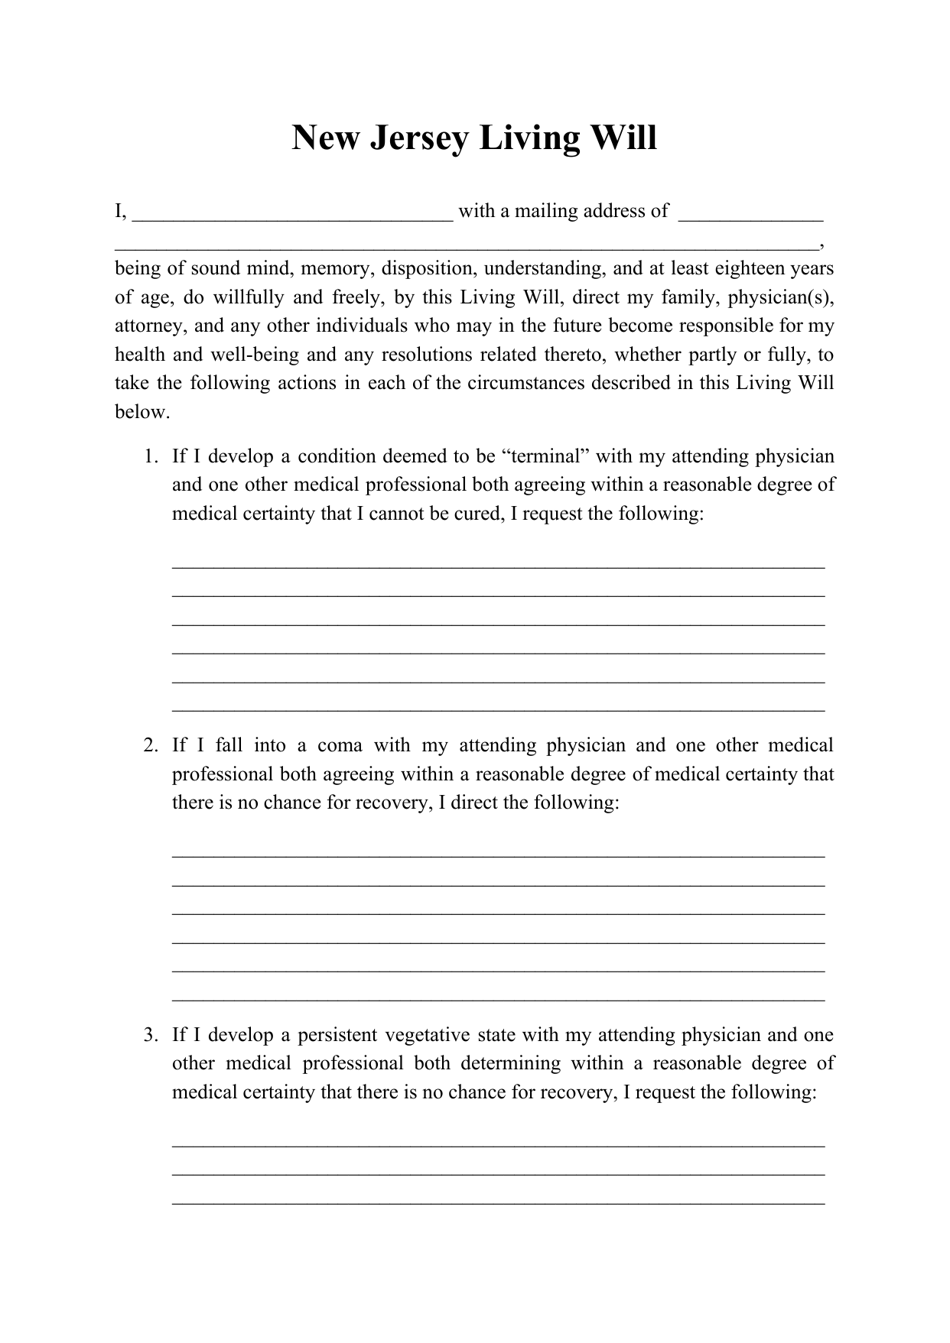 new-jersey-living-will-form-fill-out-sign-online-and-download-pdf-templateroller